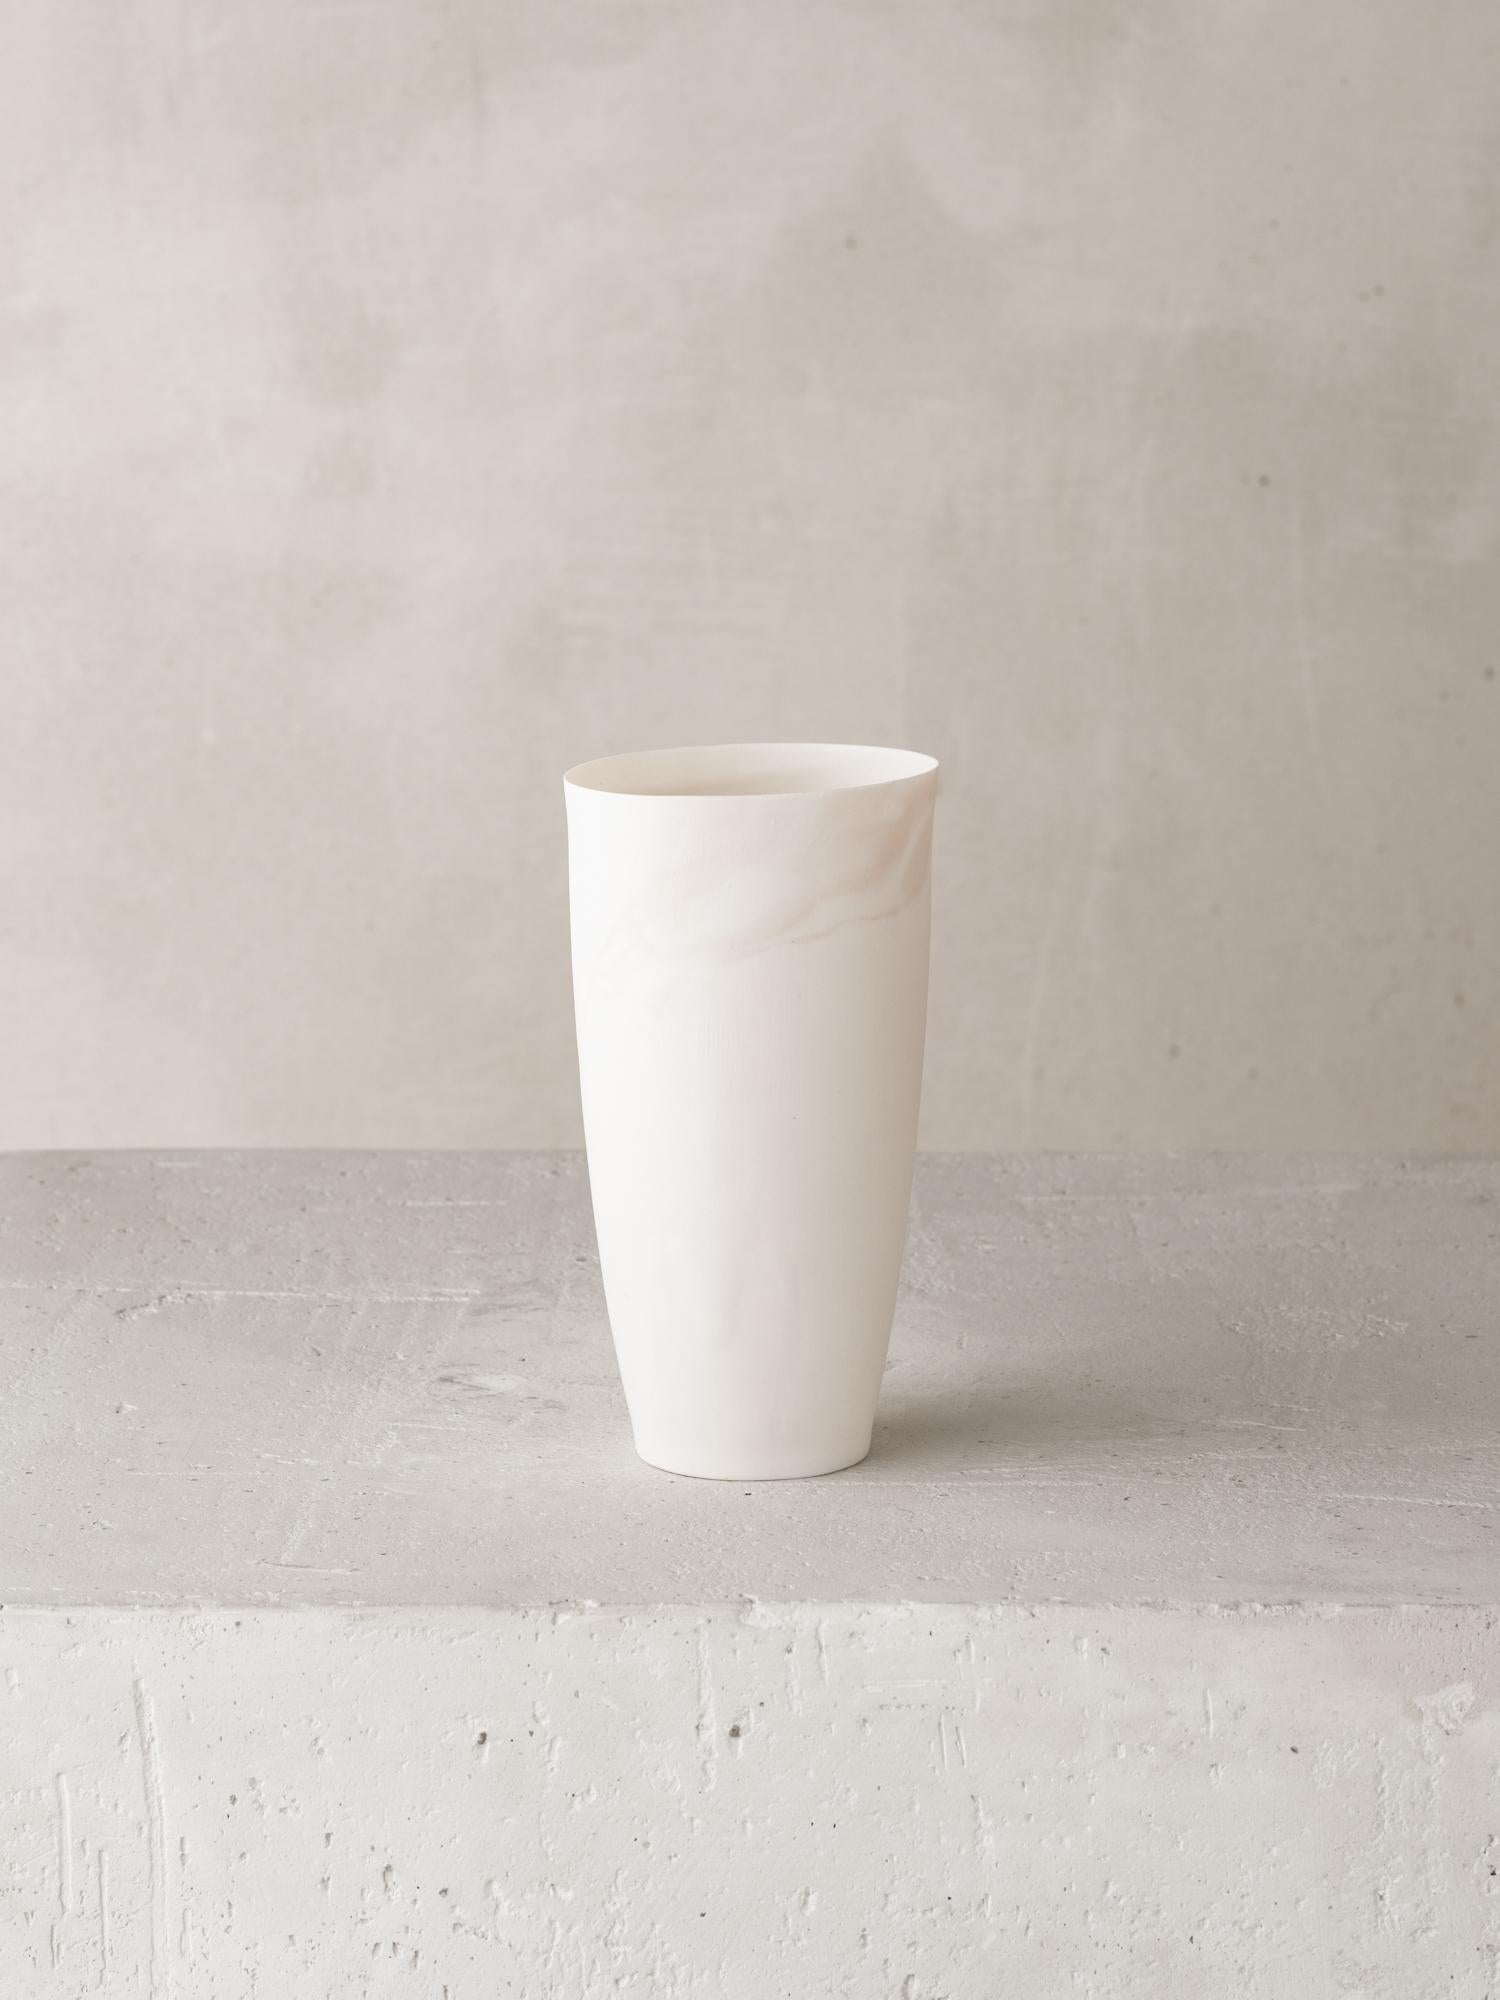 Materials: Cast Porcelain with Colored Oxide 

For over forty years Katherine Glenday has been creating meditative ceramic and porcelain pieces by hand in her South African studio. Remarkable in their translucency and luminosity, the porcelain